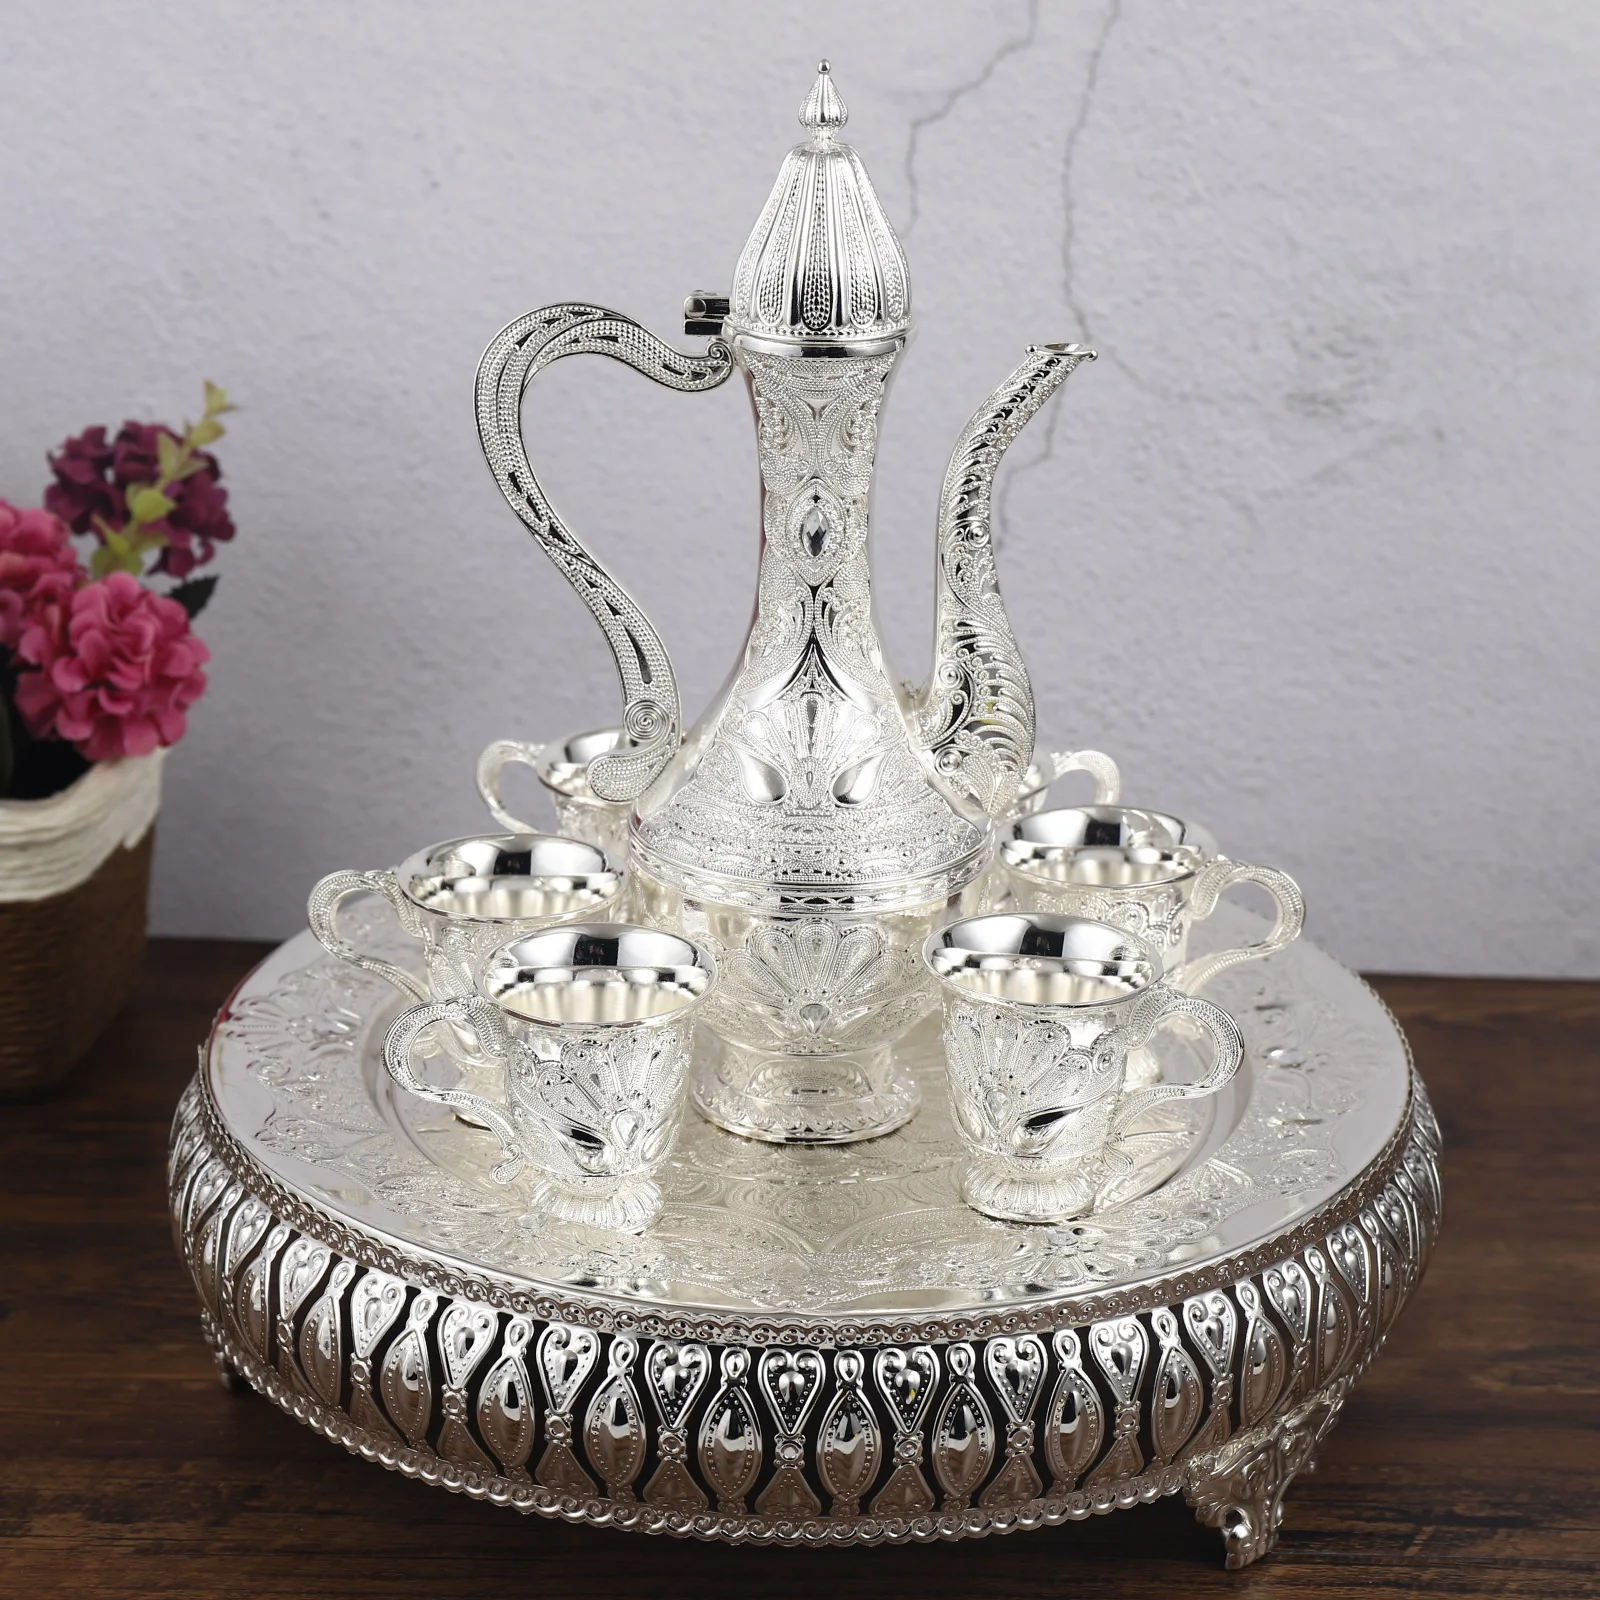 

QIAN HU Wedding Decoration Home Turkish Cast Iron Coffee Tea Silver Set Inter Crystal Stone with Teapot Tray and 6 Cups, Brozen